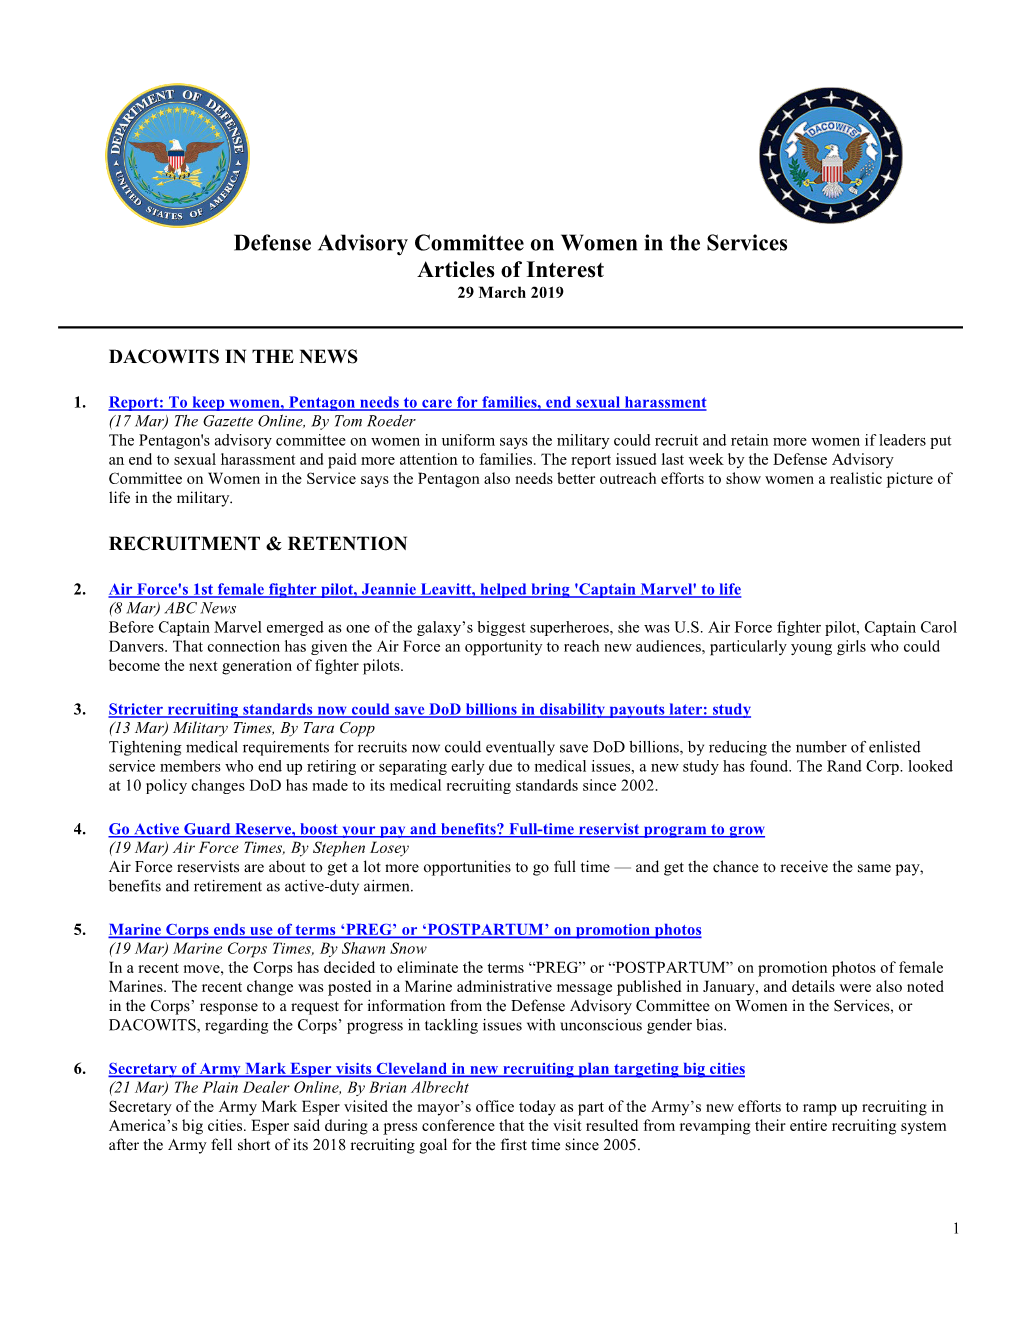 Defense Advisory Committee on Women in the Services Articles of Interest 29 March 2019